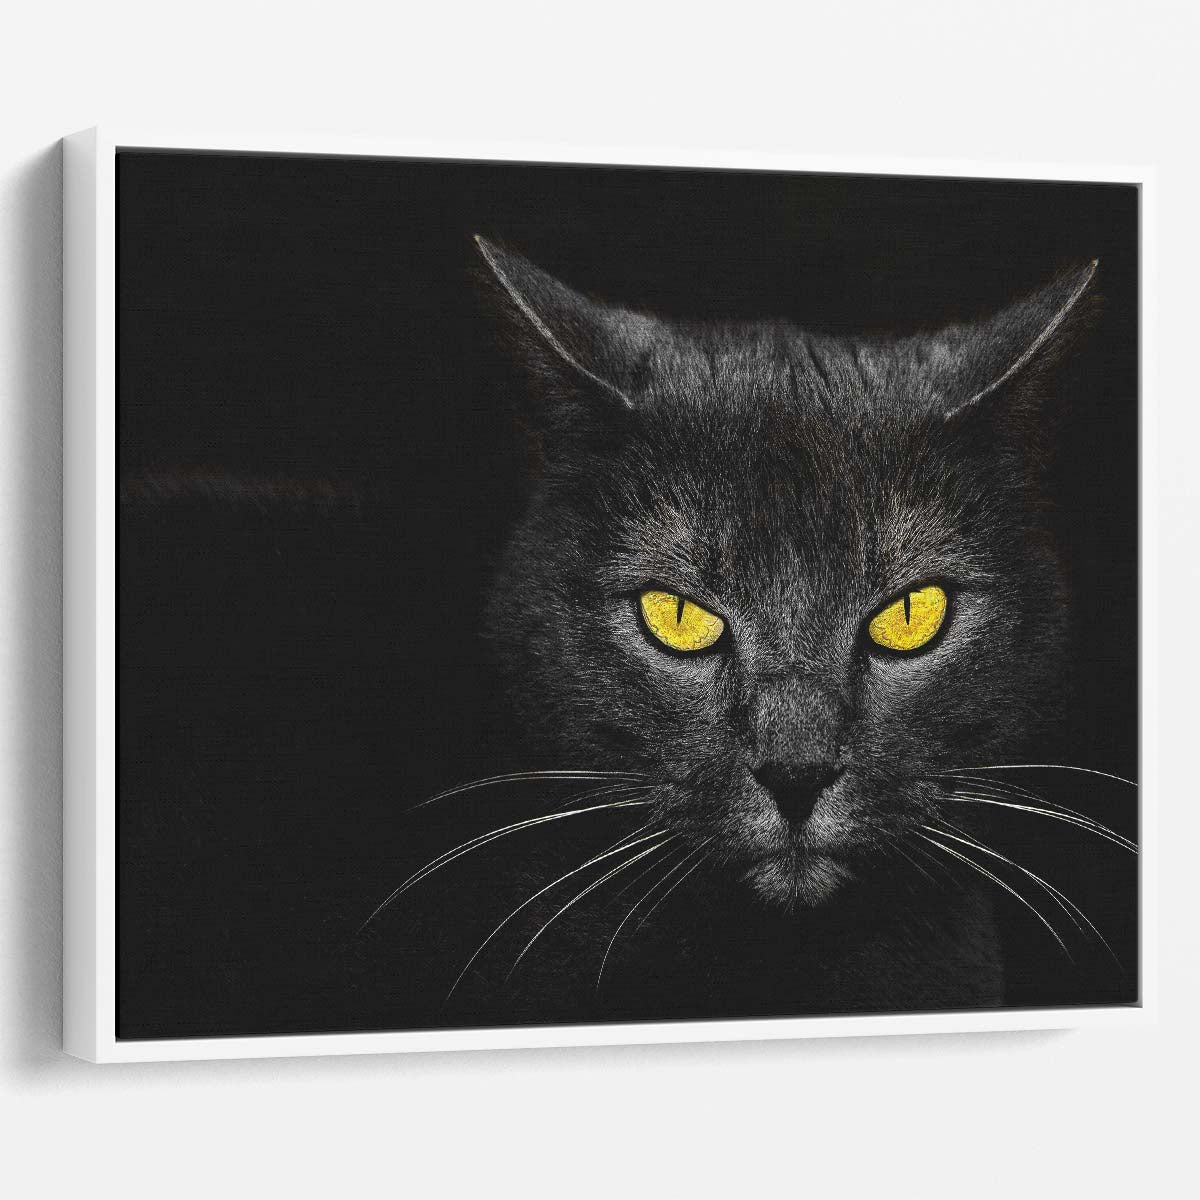 Black Cat with Yellow Eyes Dark Whiskers Wall Art by Luxuriance Designs. Made in USA.